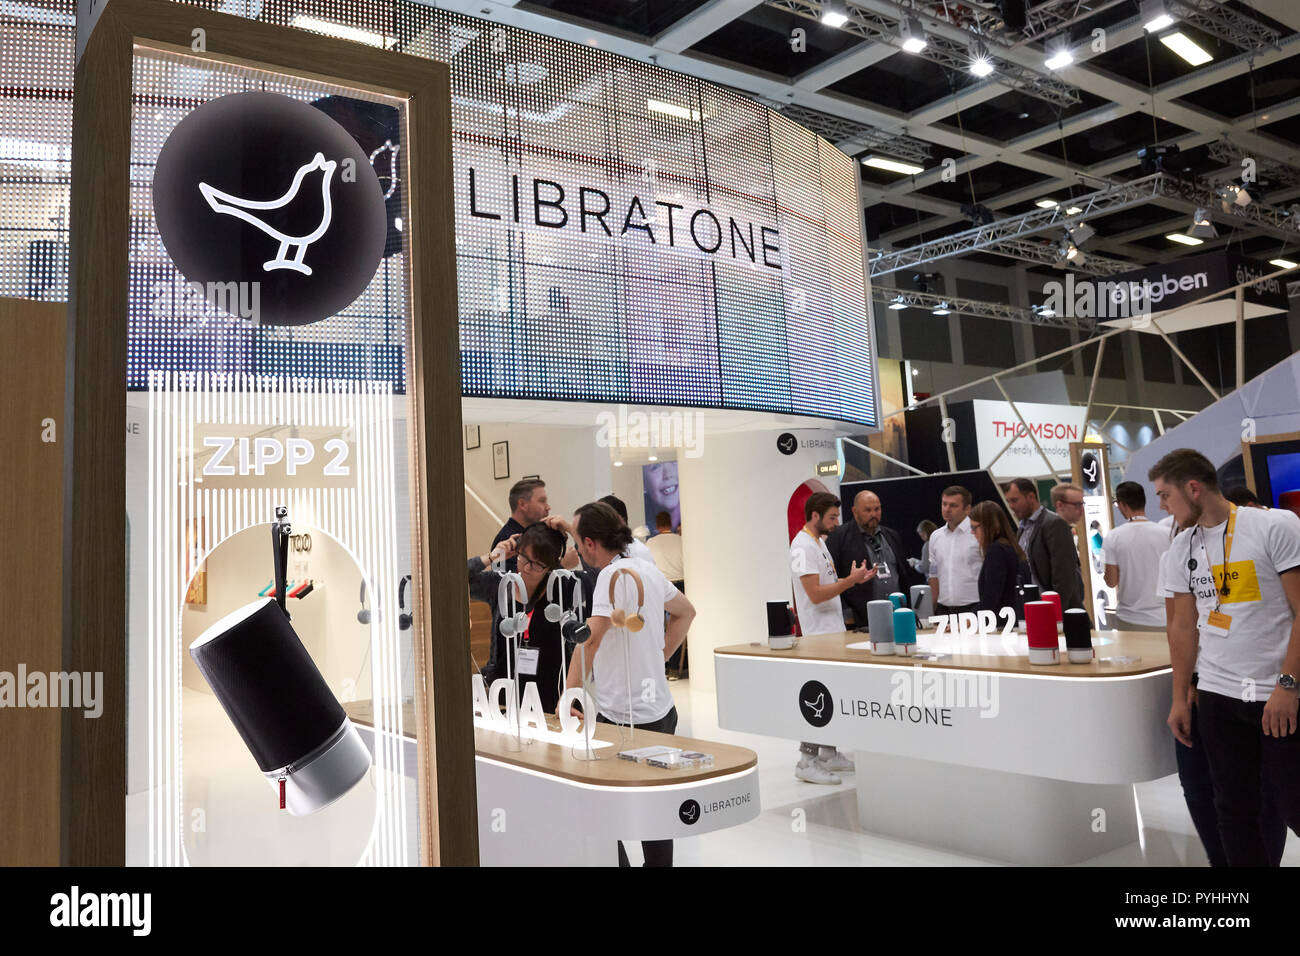 Berlin, Germany - The Danish company Libratone is presenting its innovations at IFA 2018. Stock Photo